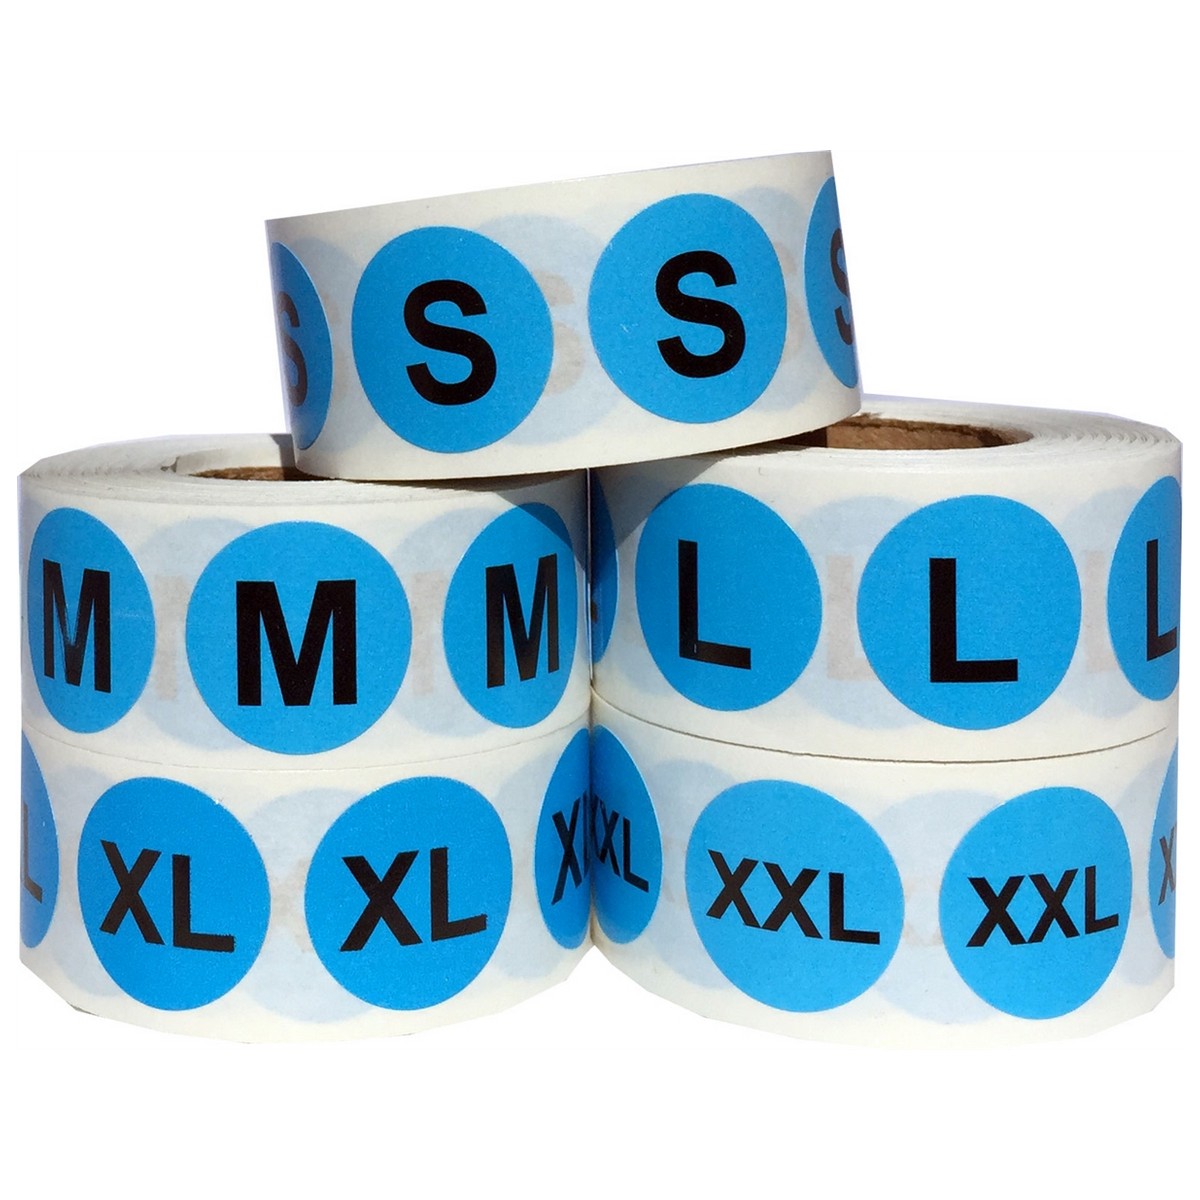 1/2 ( XXXL ) XXX-Large Stickers Labels for Retail, Clothing, Clothing  Sizes Etc (1 Roll / Black) 